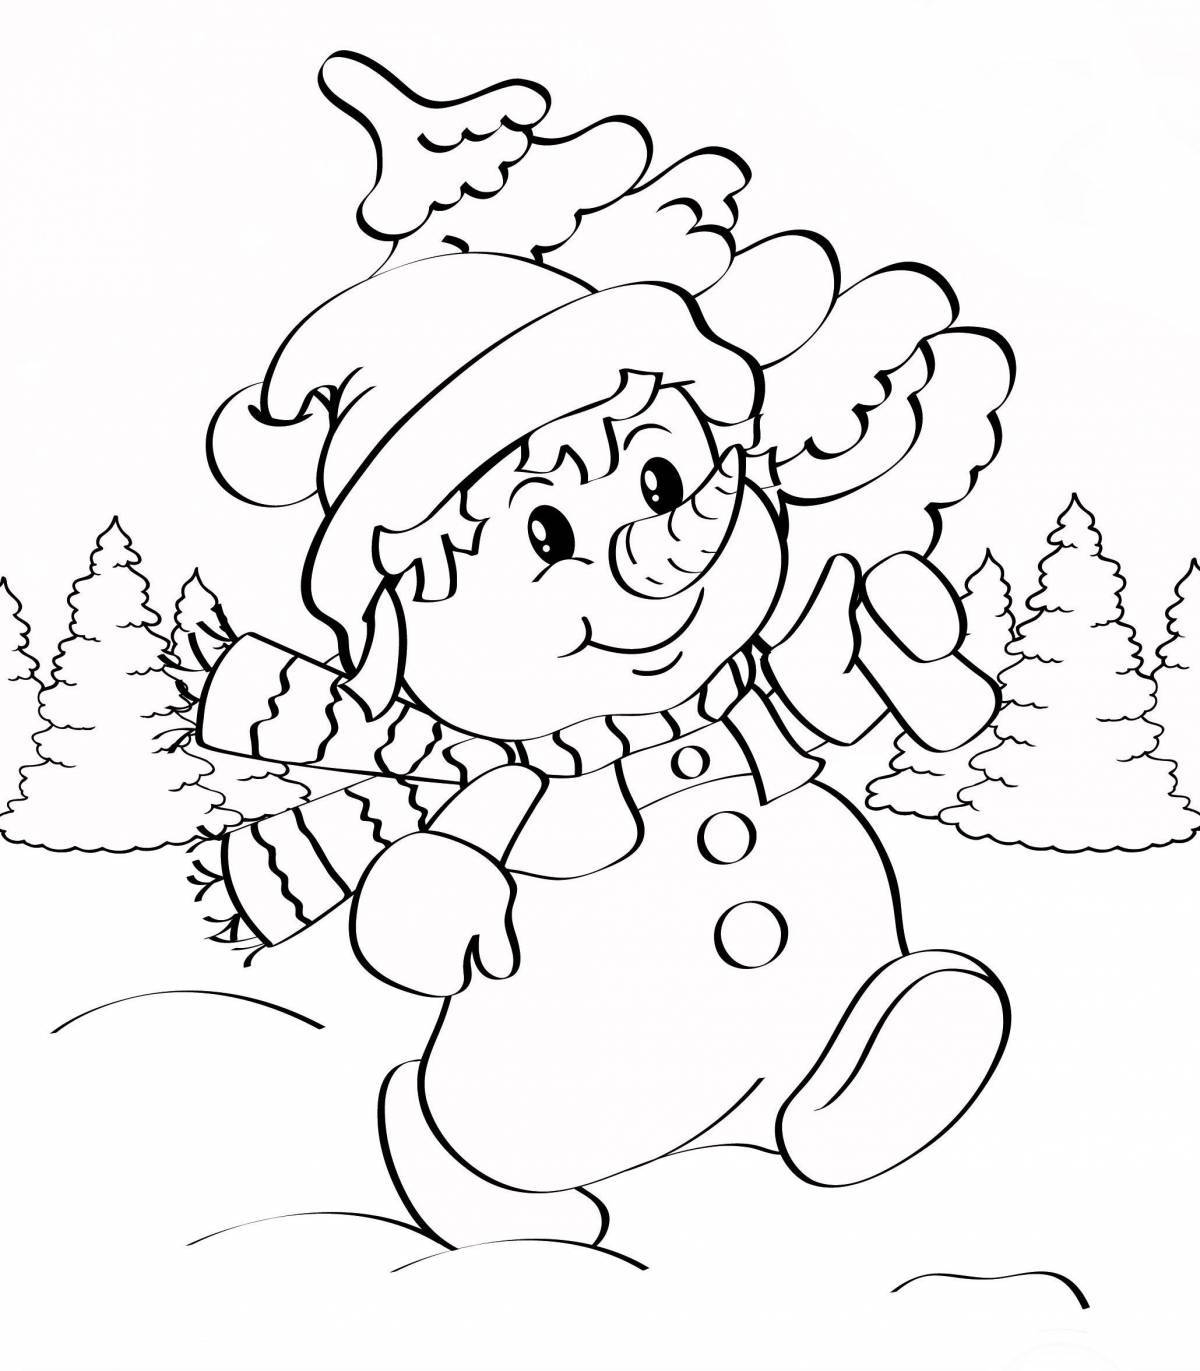 Animated Christmas coloring pages for kids